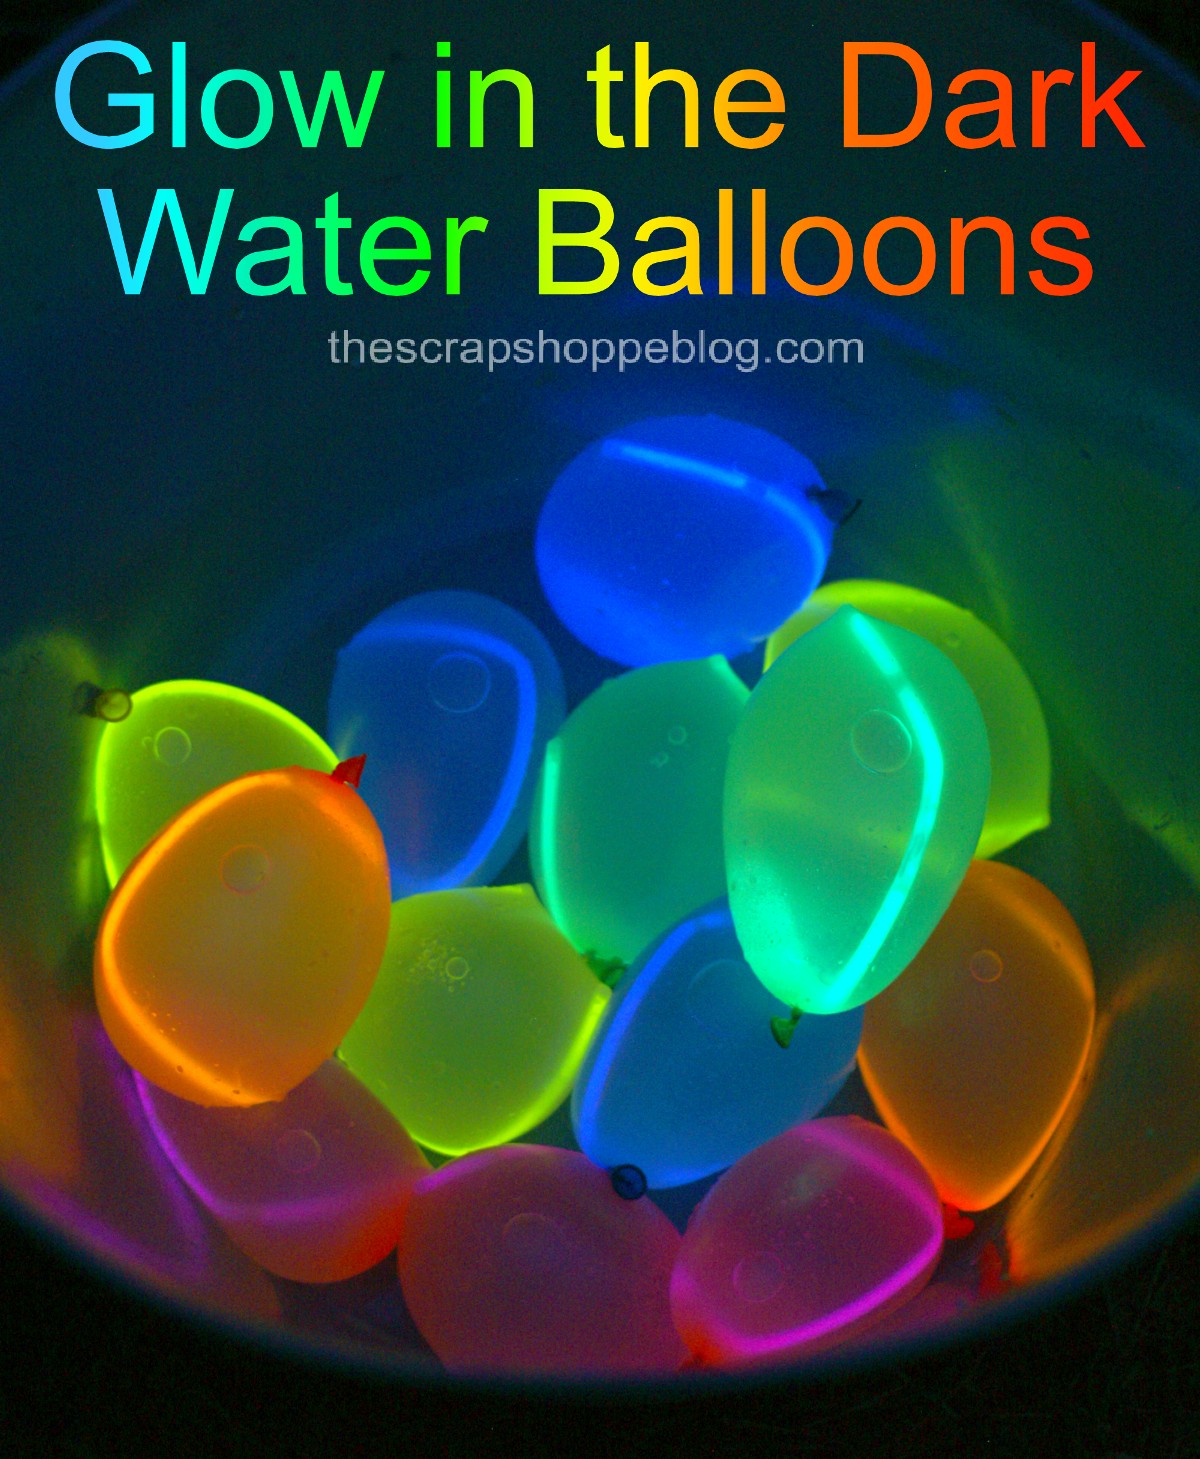 Glow in the dark water balloons